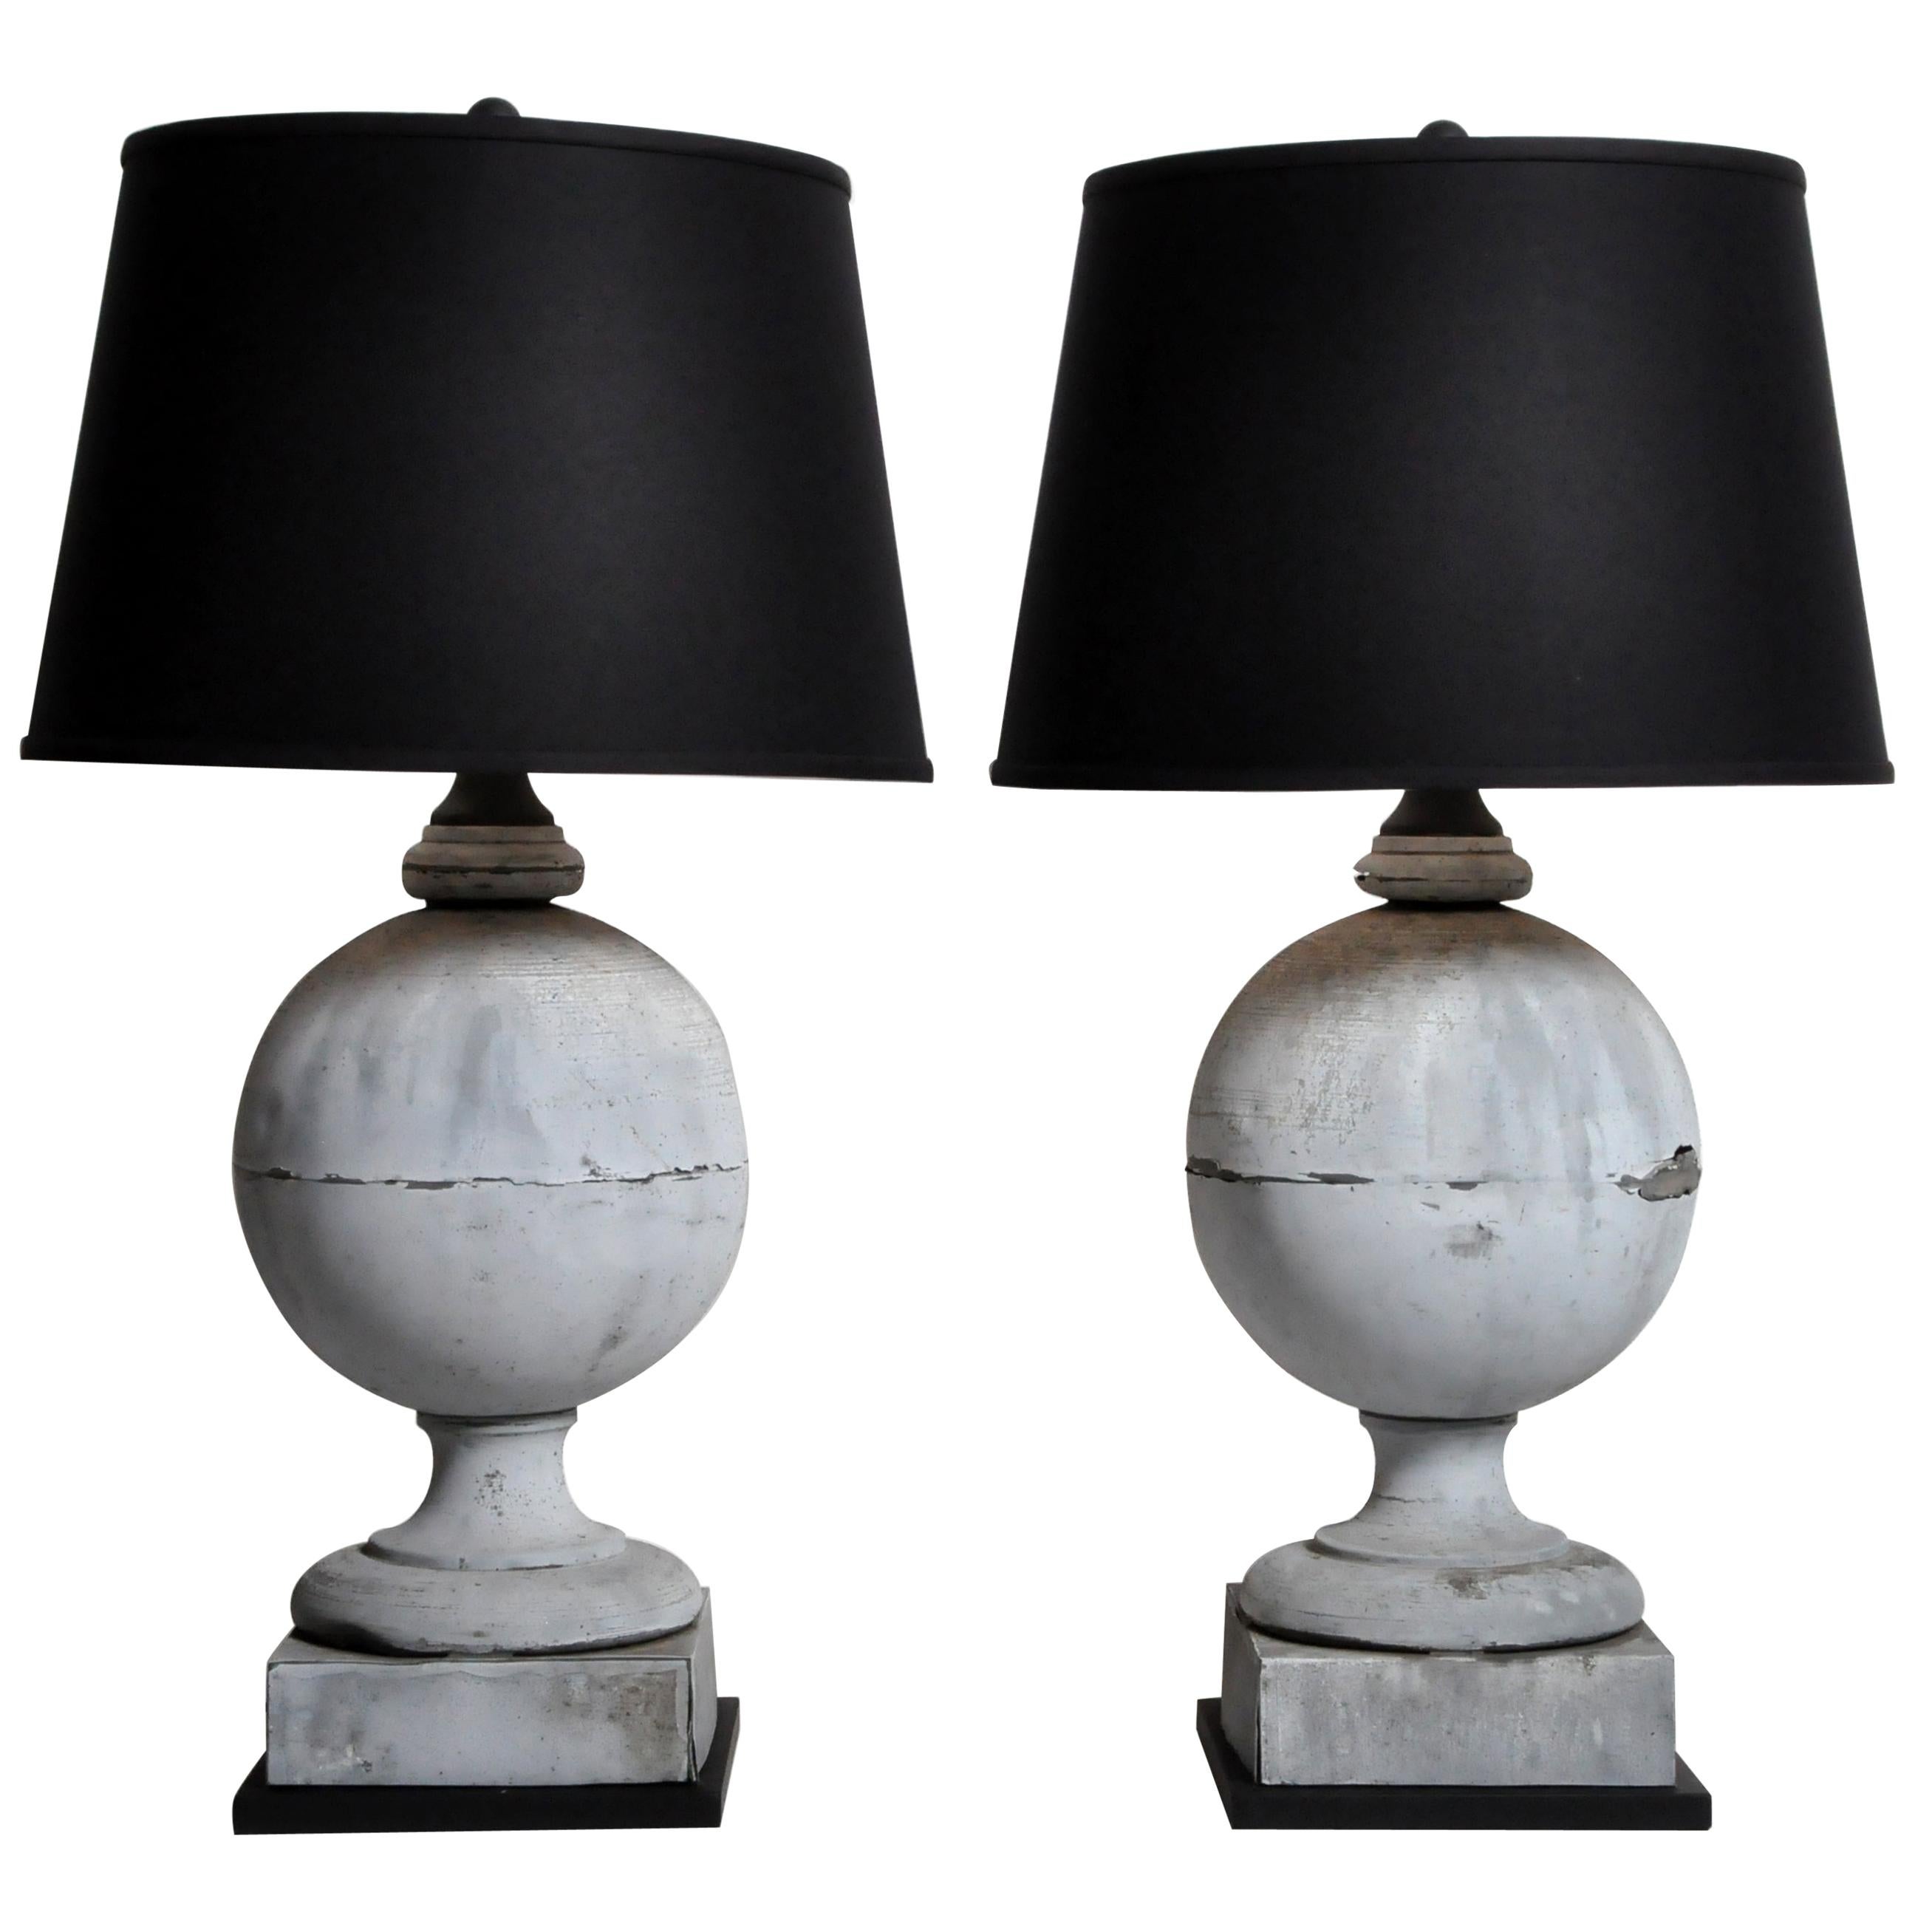 Pair of French Zinc Architectural Finial Lamps